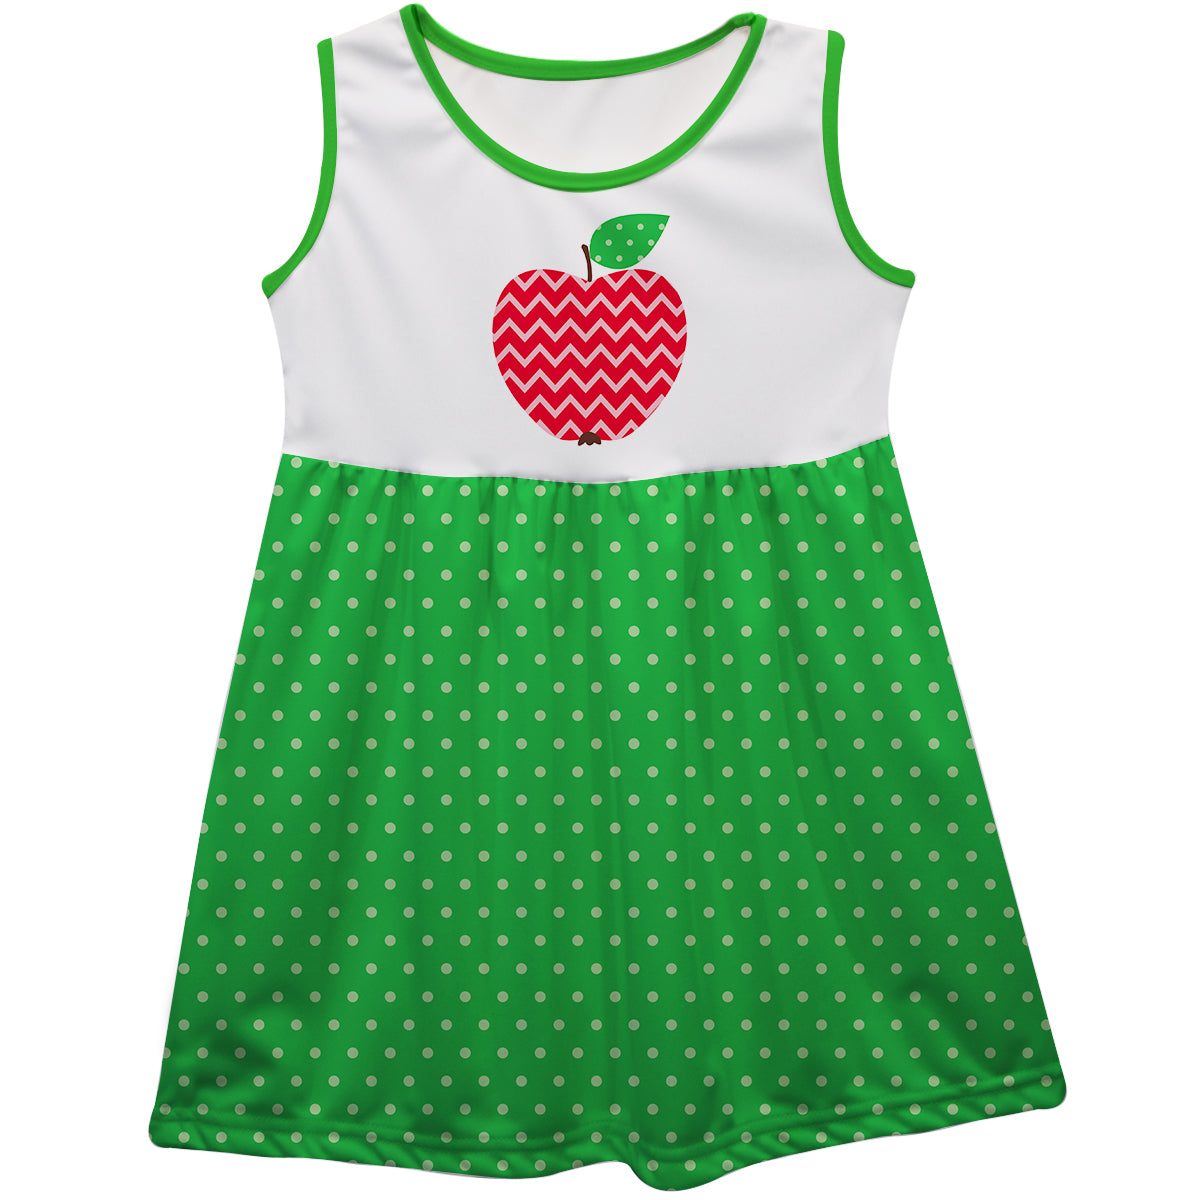 Apple And Polka Dots White And Green Tank Dress - Wimziy&Co.